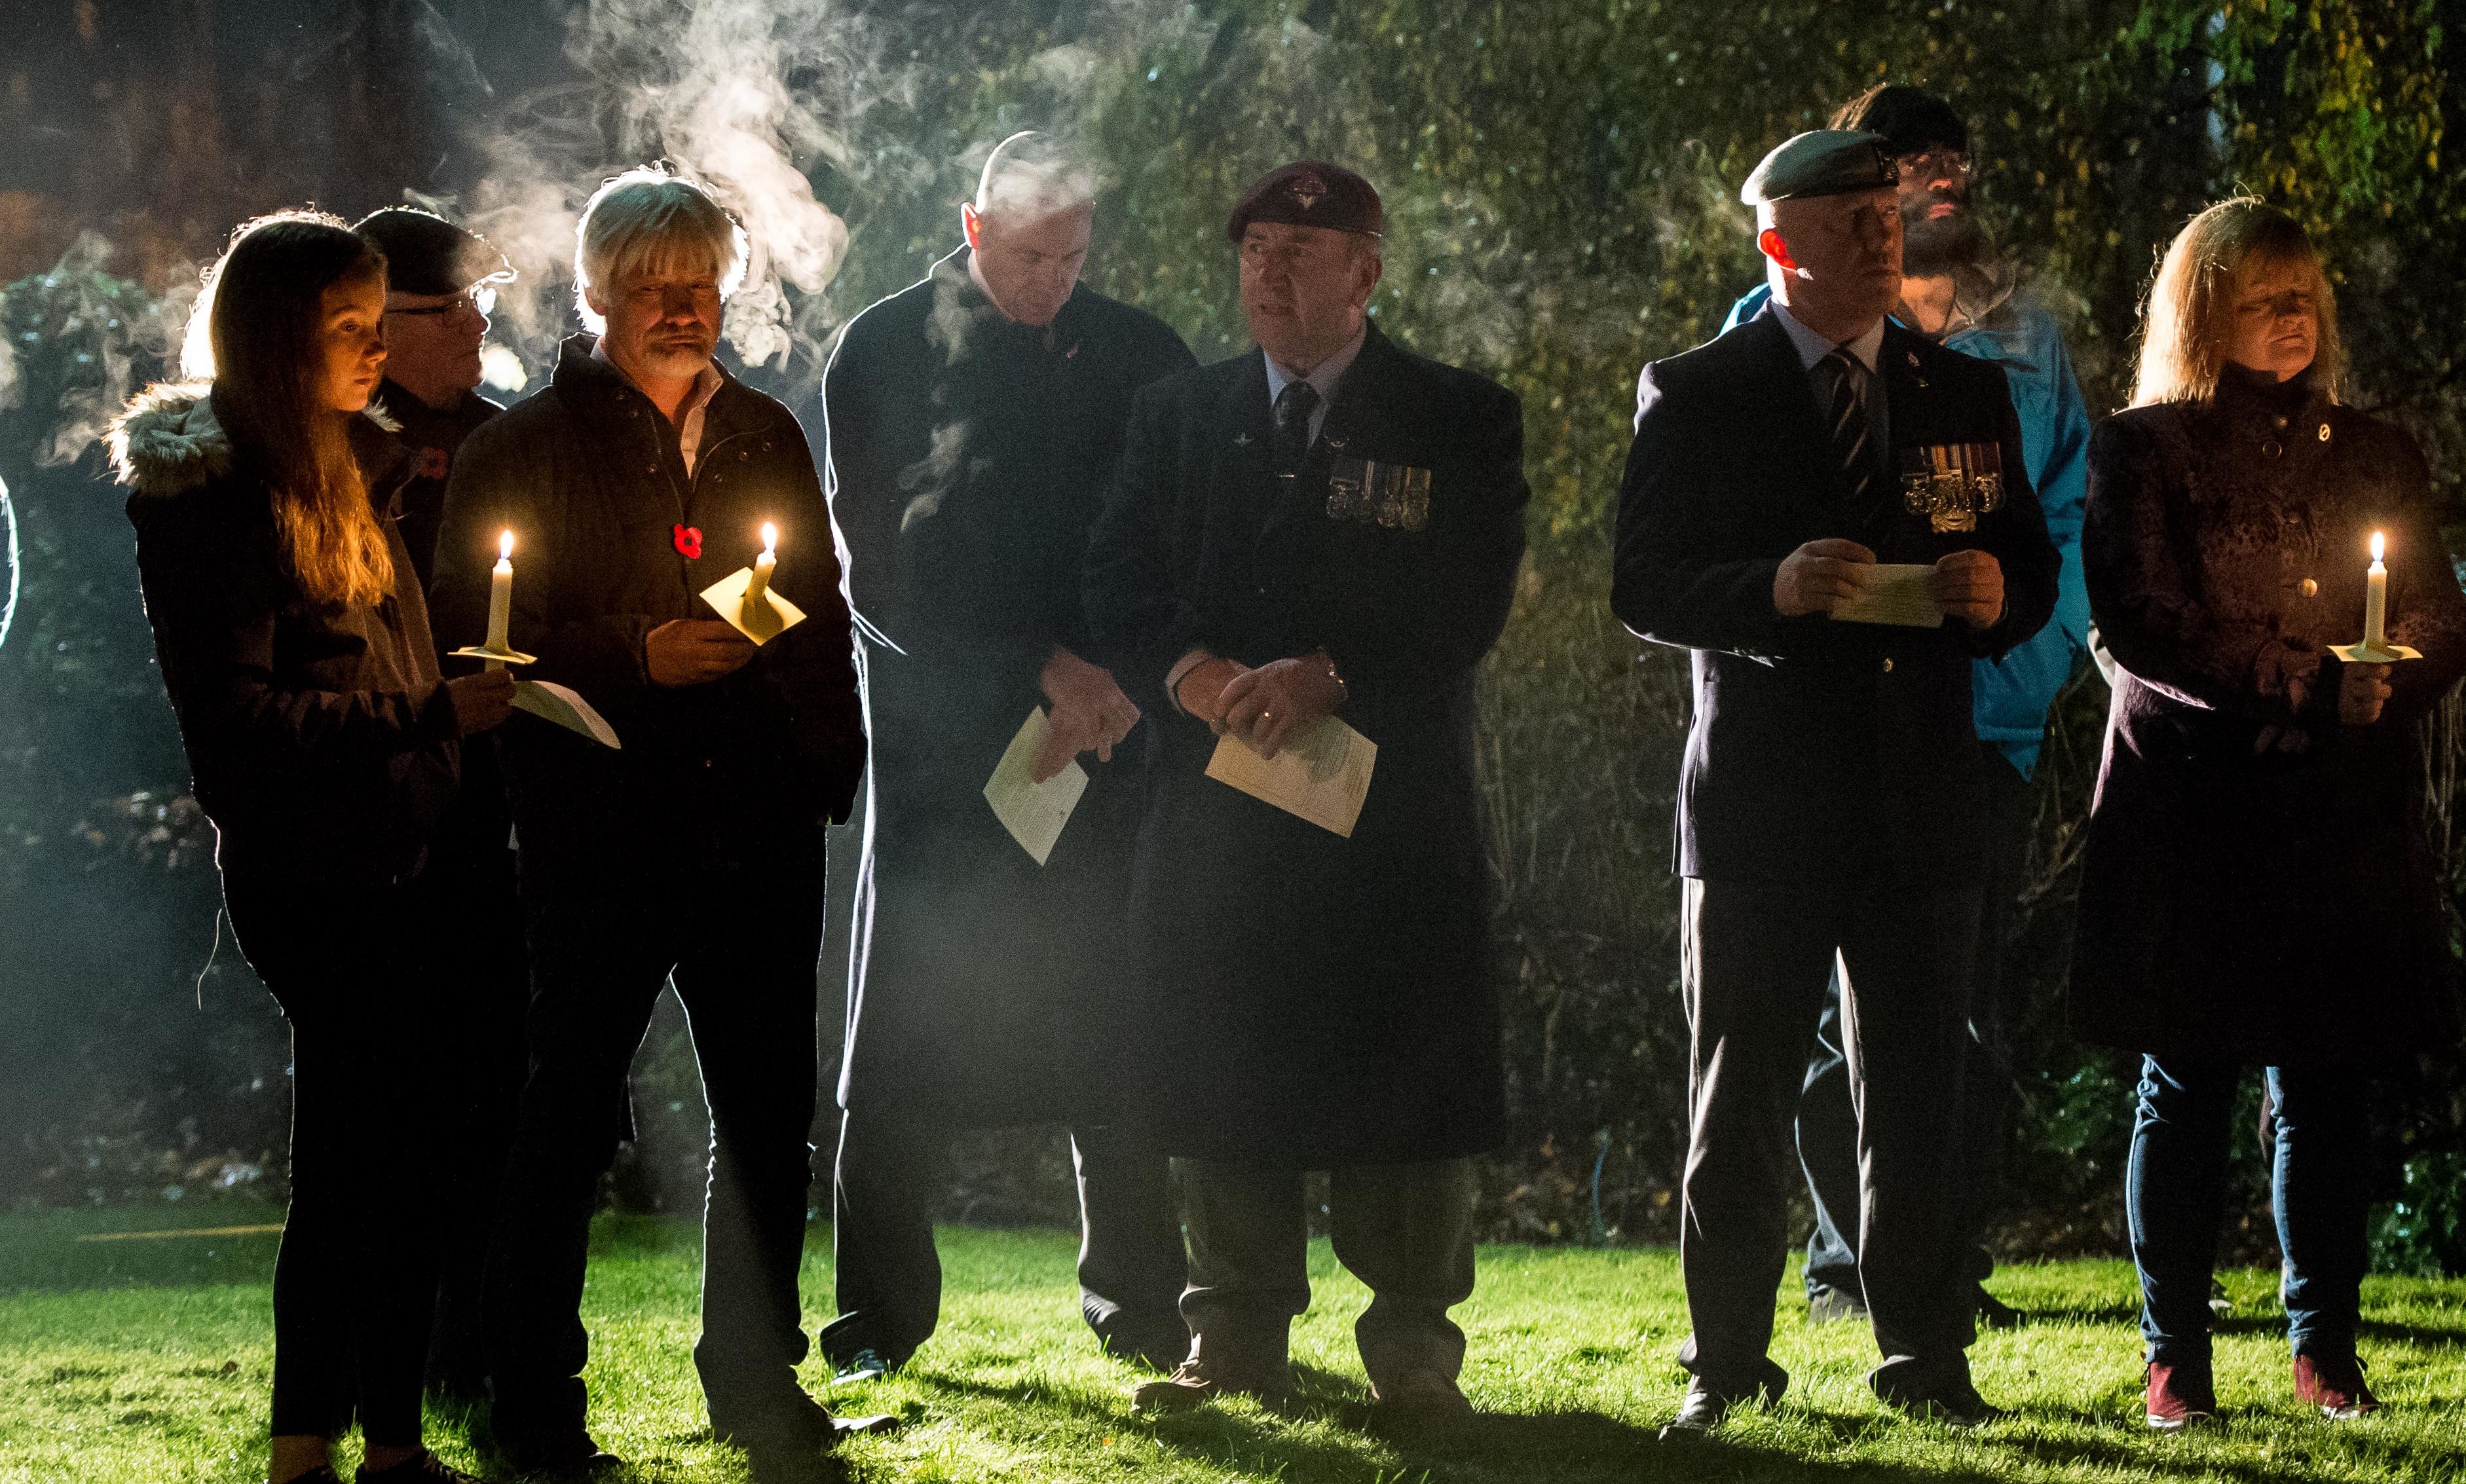 Resisents of Perthshire village, Stanley, held a memorial service on Sunday evening, to mark the 53 locals who gave their lives.